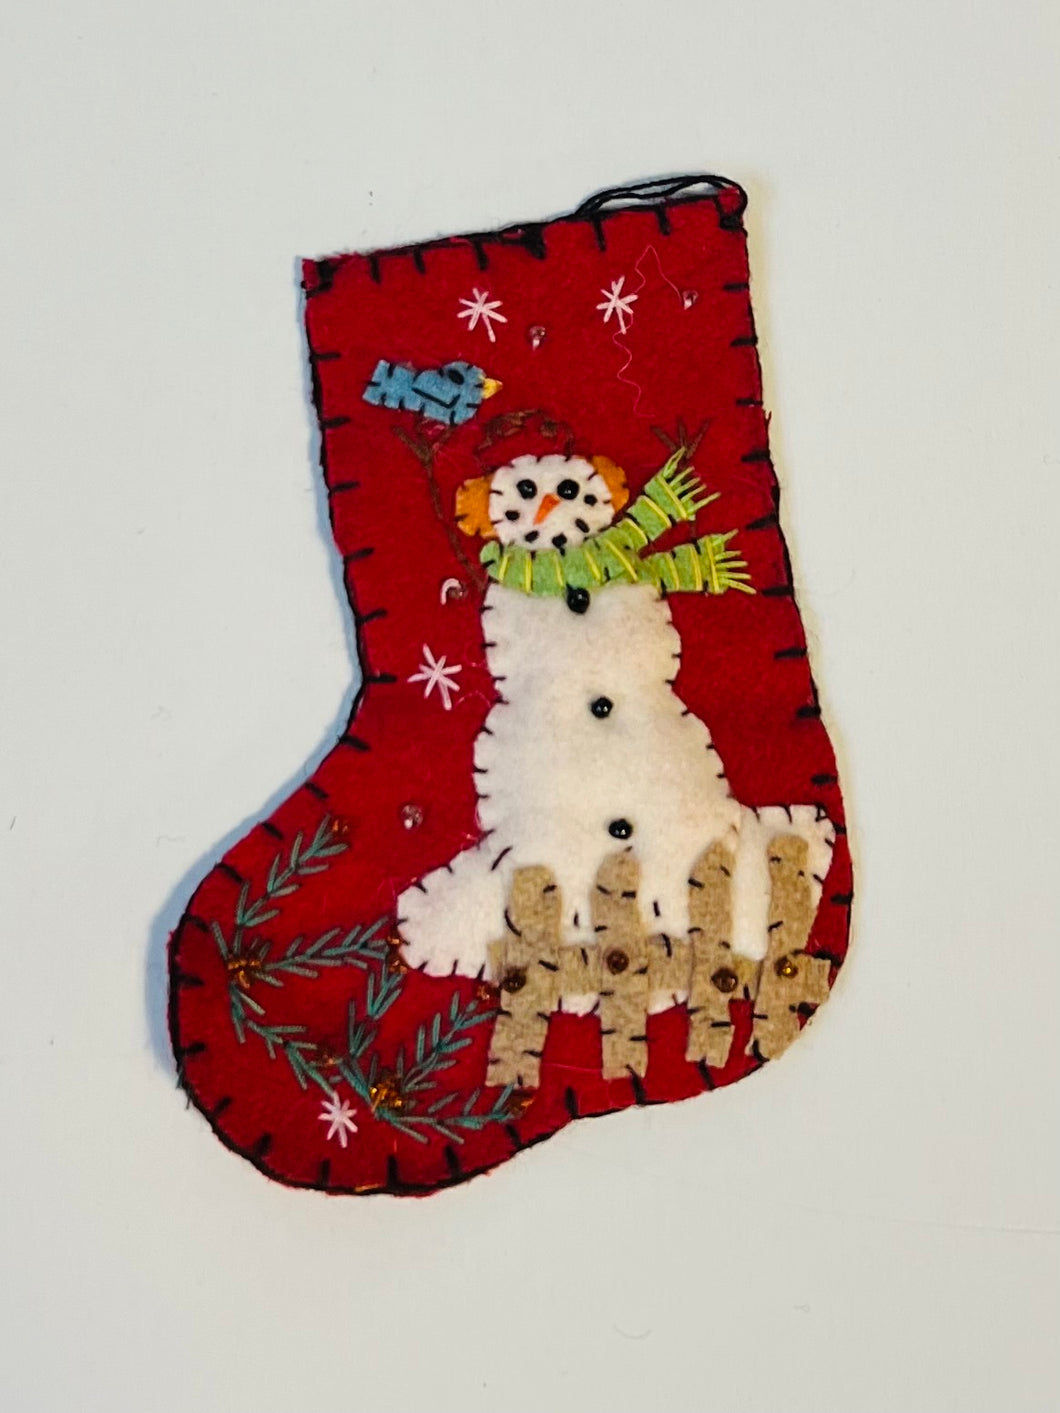 Snowman Waiting at the Fence - Mini Stocking Ornament